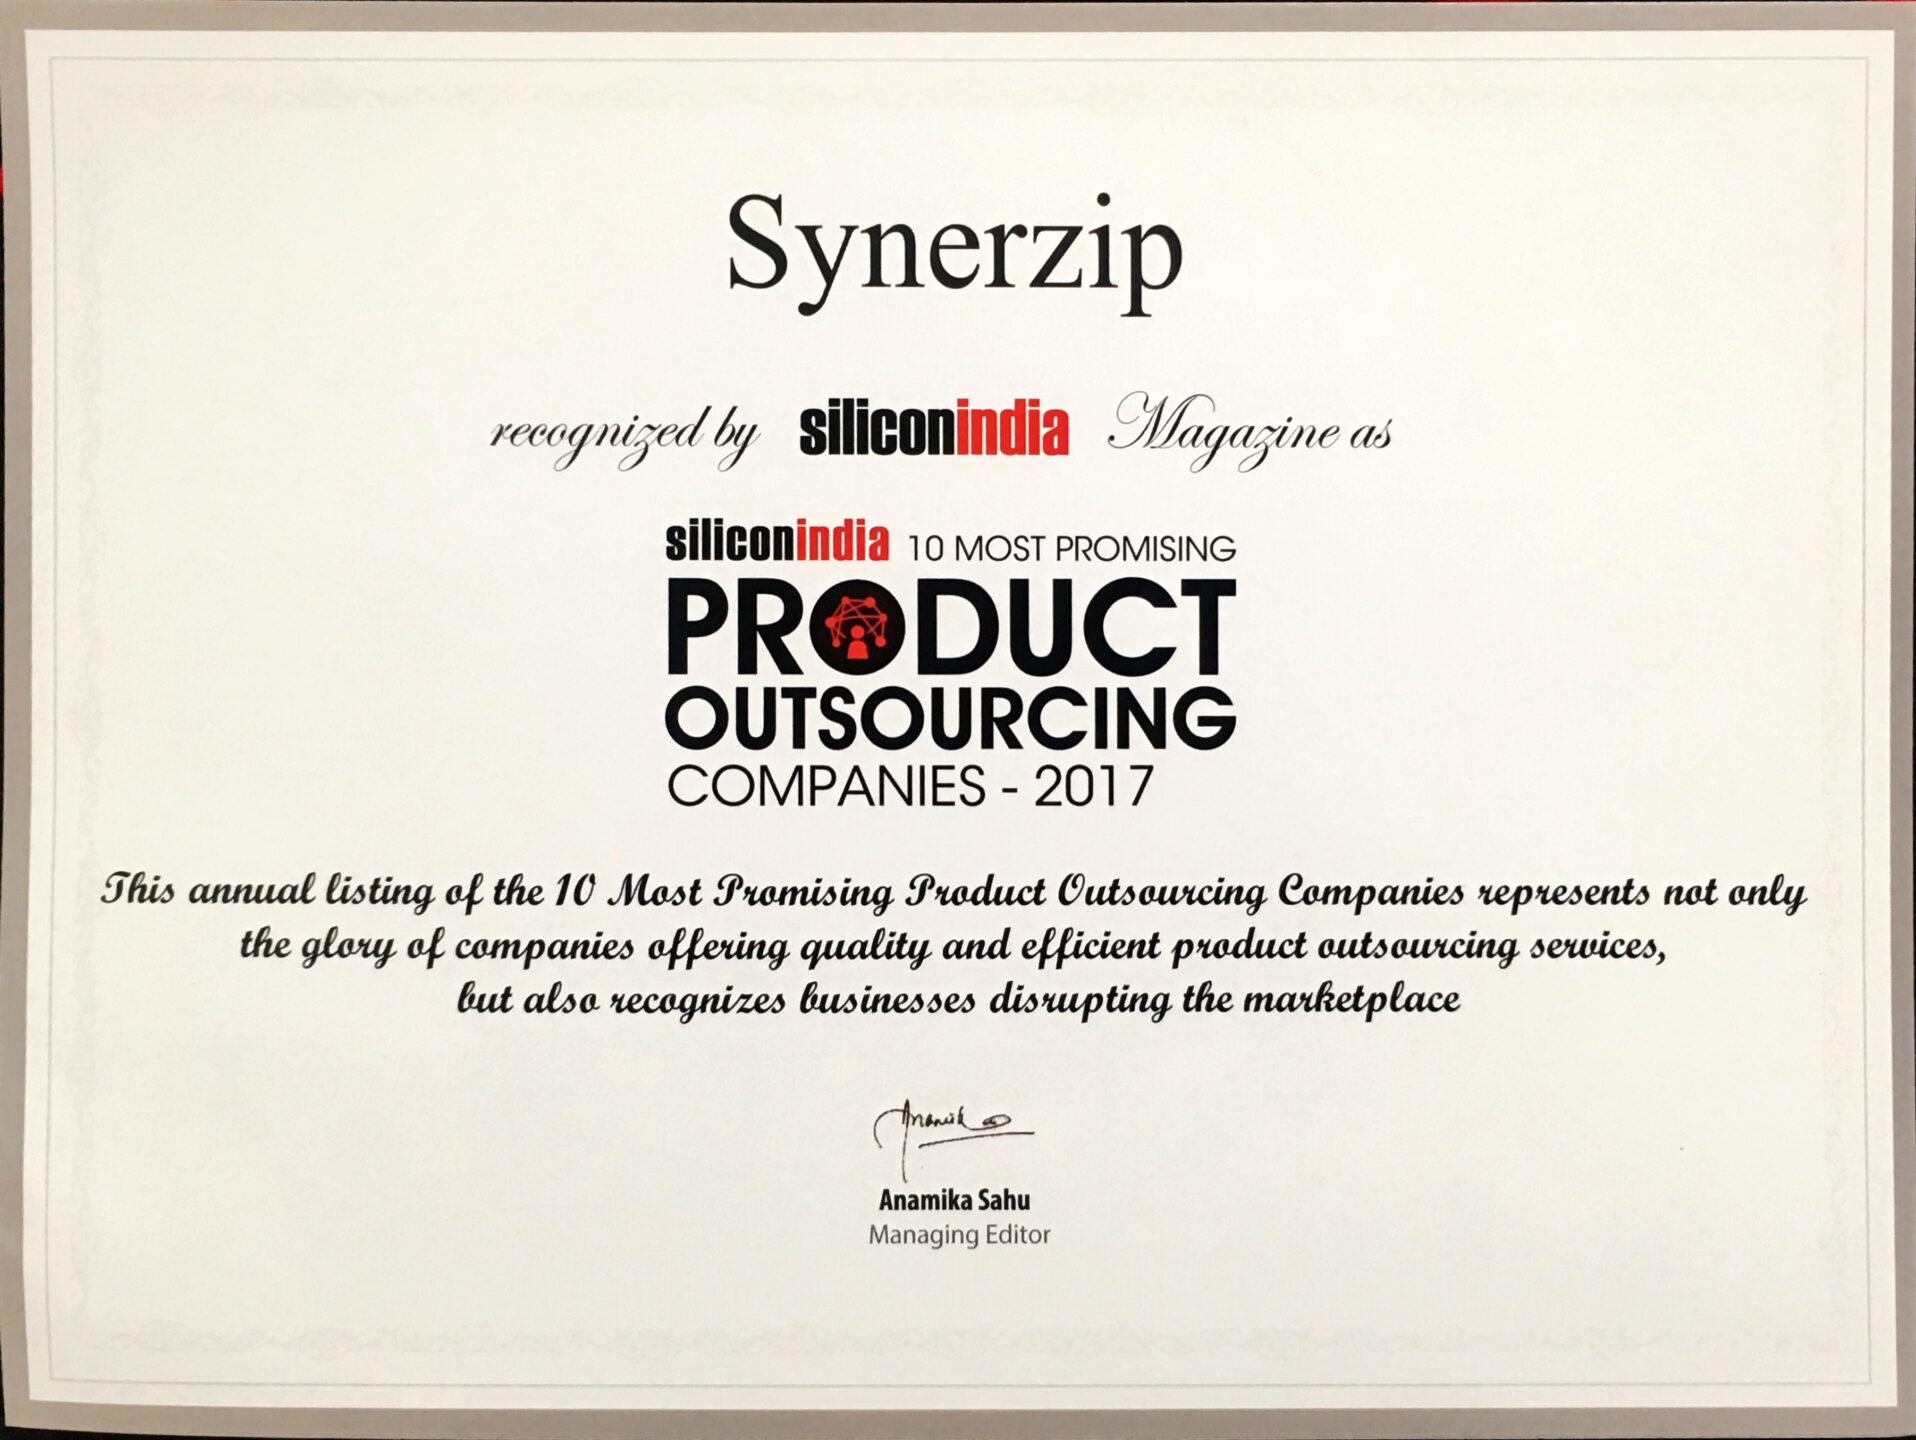 Synerzip-on-Top-Product-Outsourcing-Companies-2017-SliliconIndia